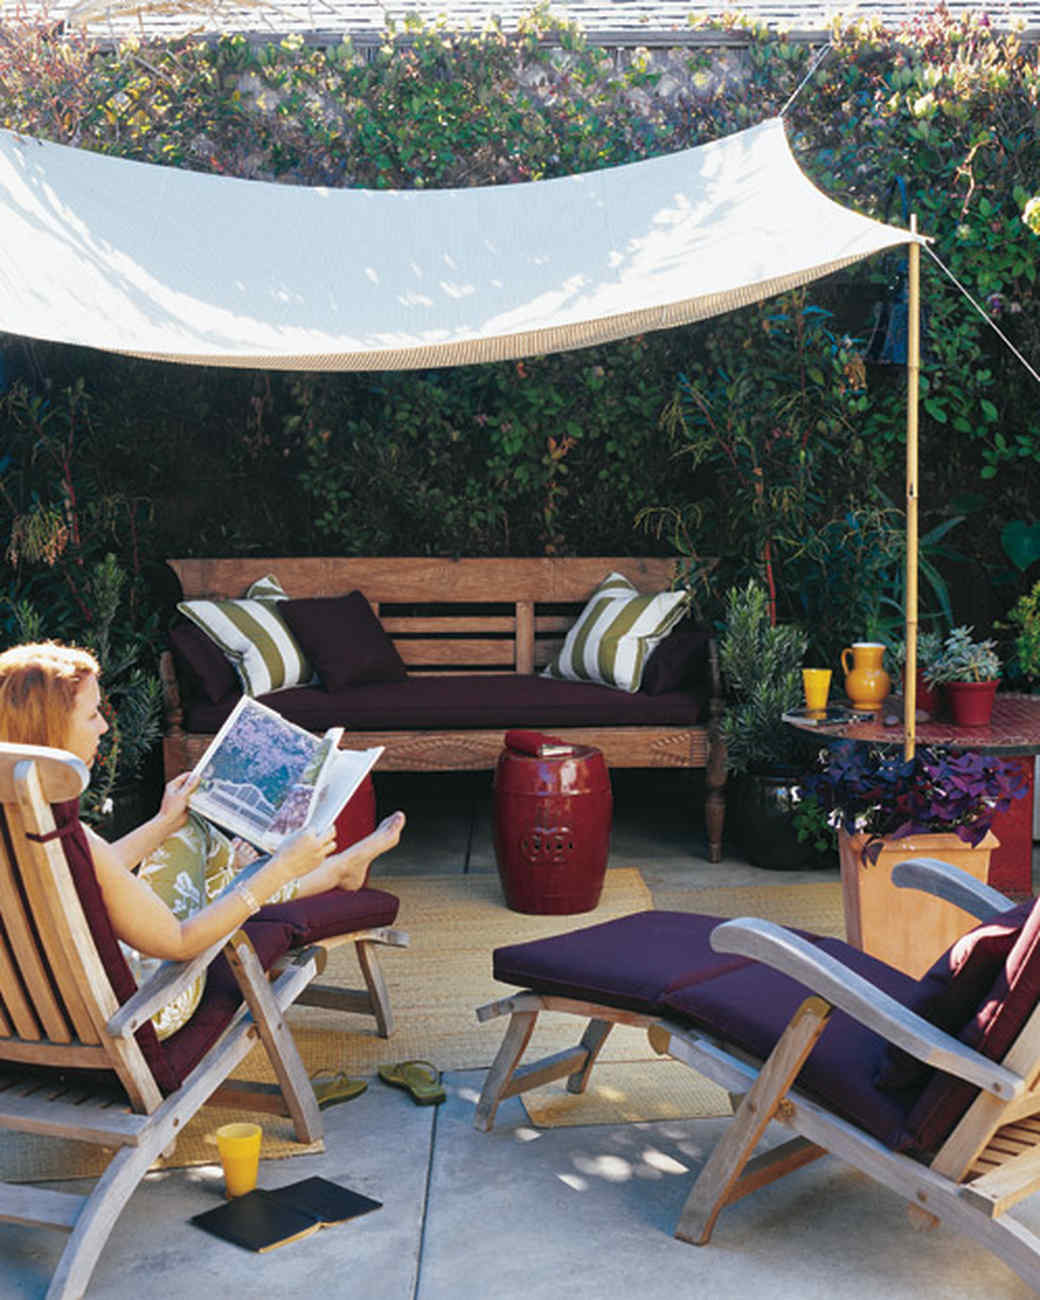 DIY Outdoor Awning
 A Slice of Shade Creating Canopies